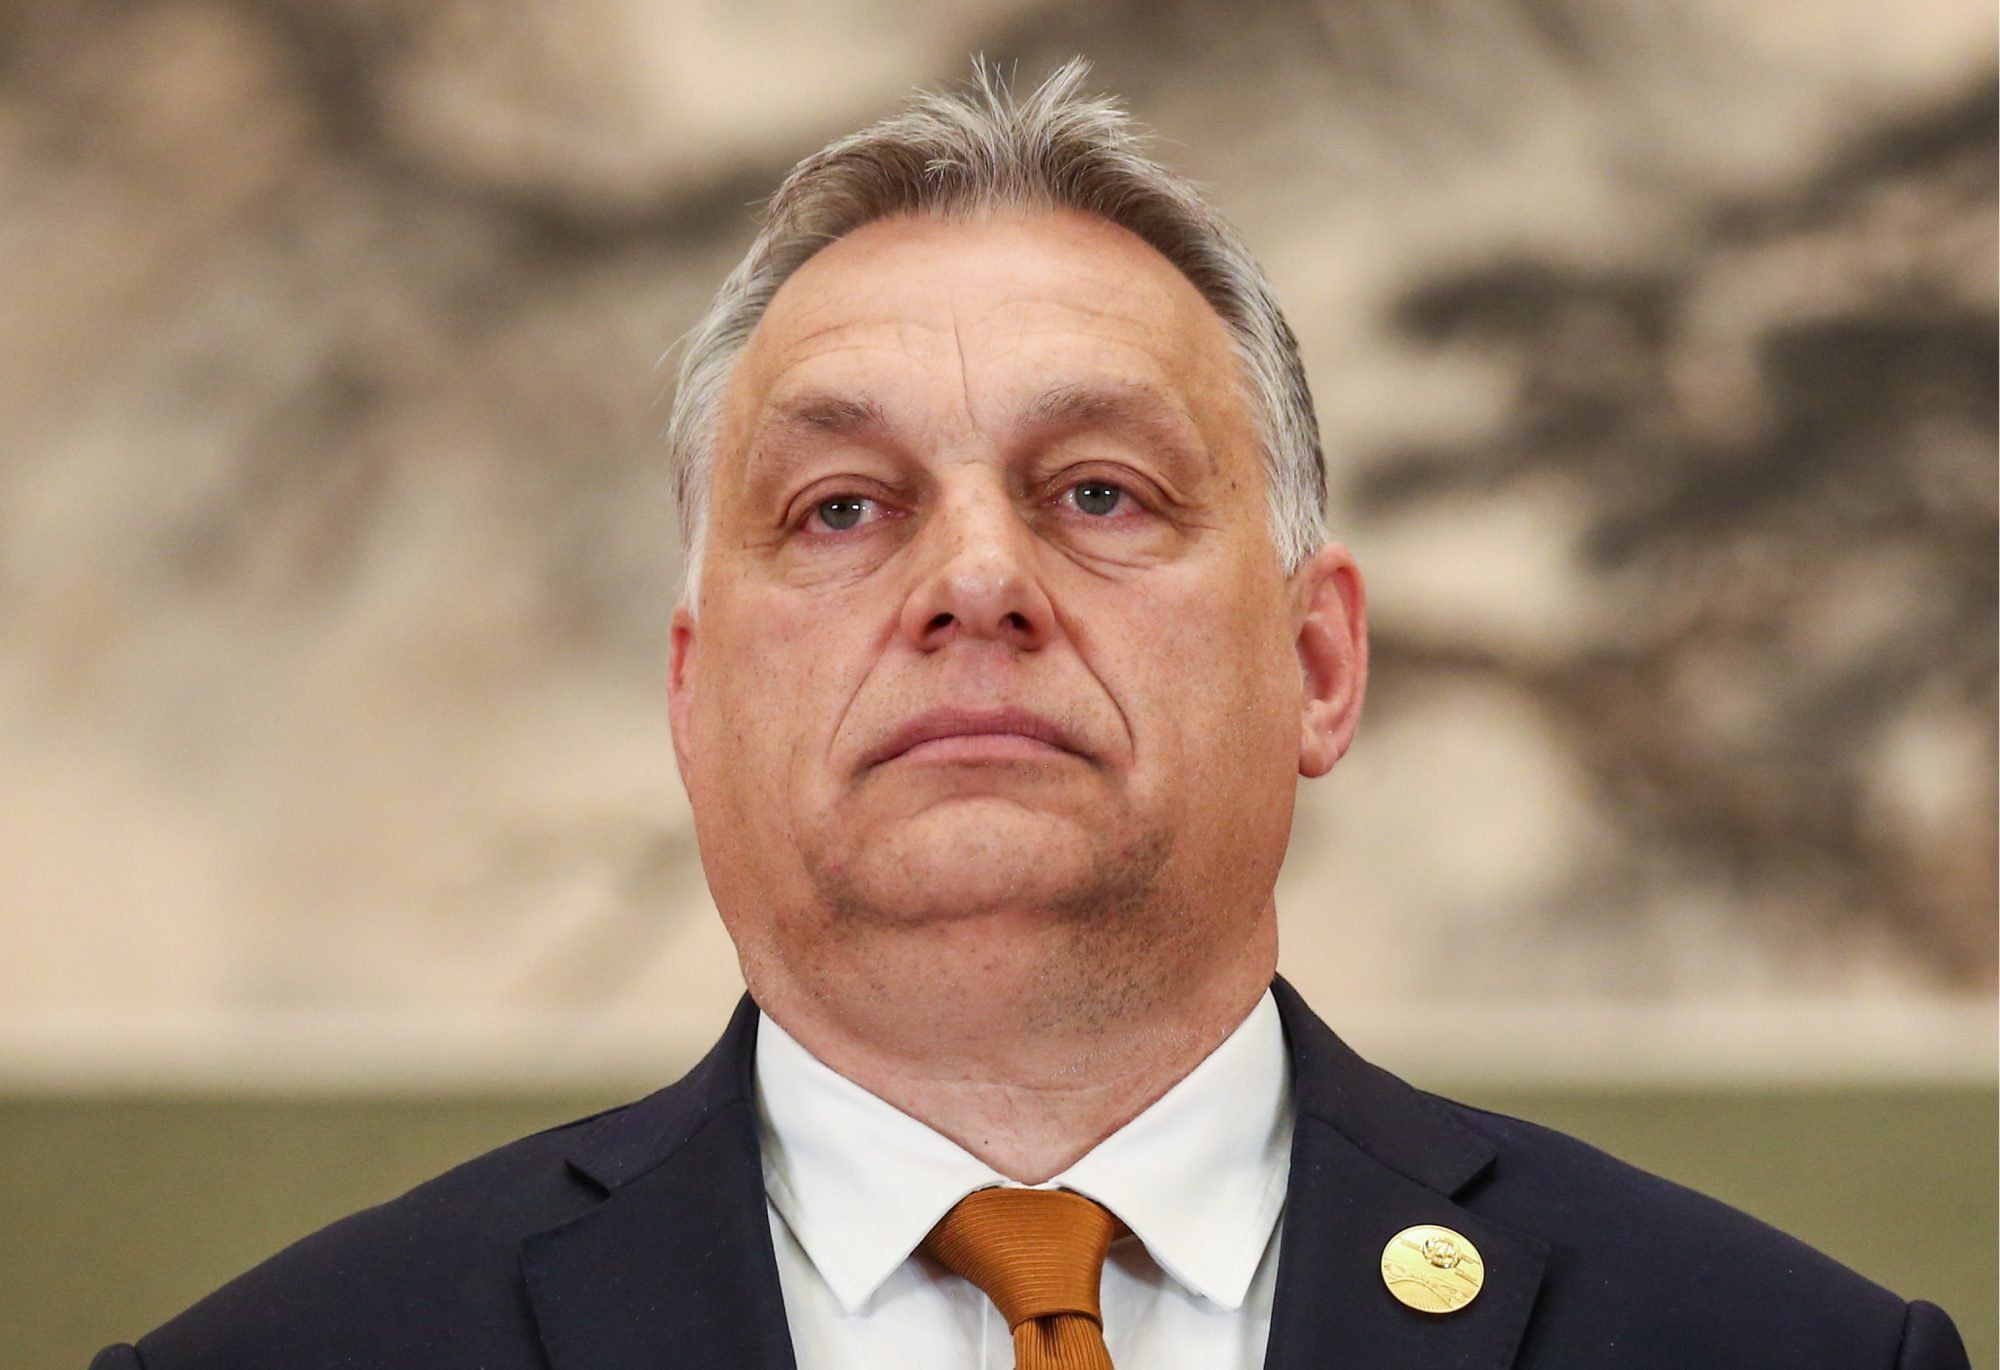 Charity linked to Viktor Orbán Wants to ‘Take Over’ British Schools to Promote Far-Right Pro-Russia Propaganda